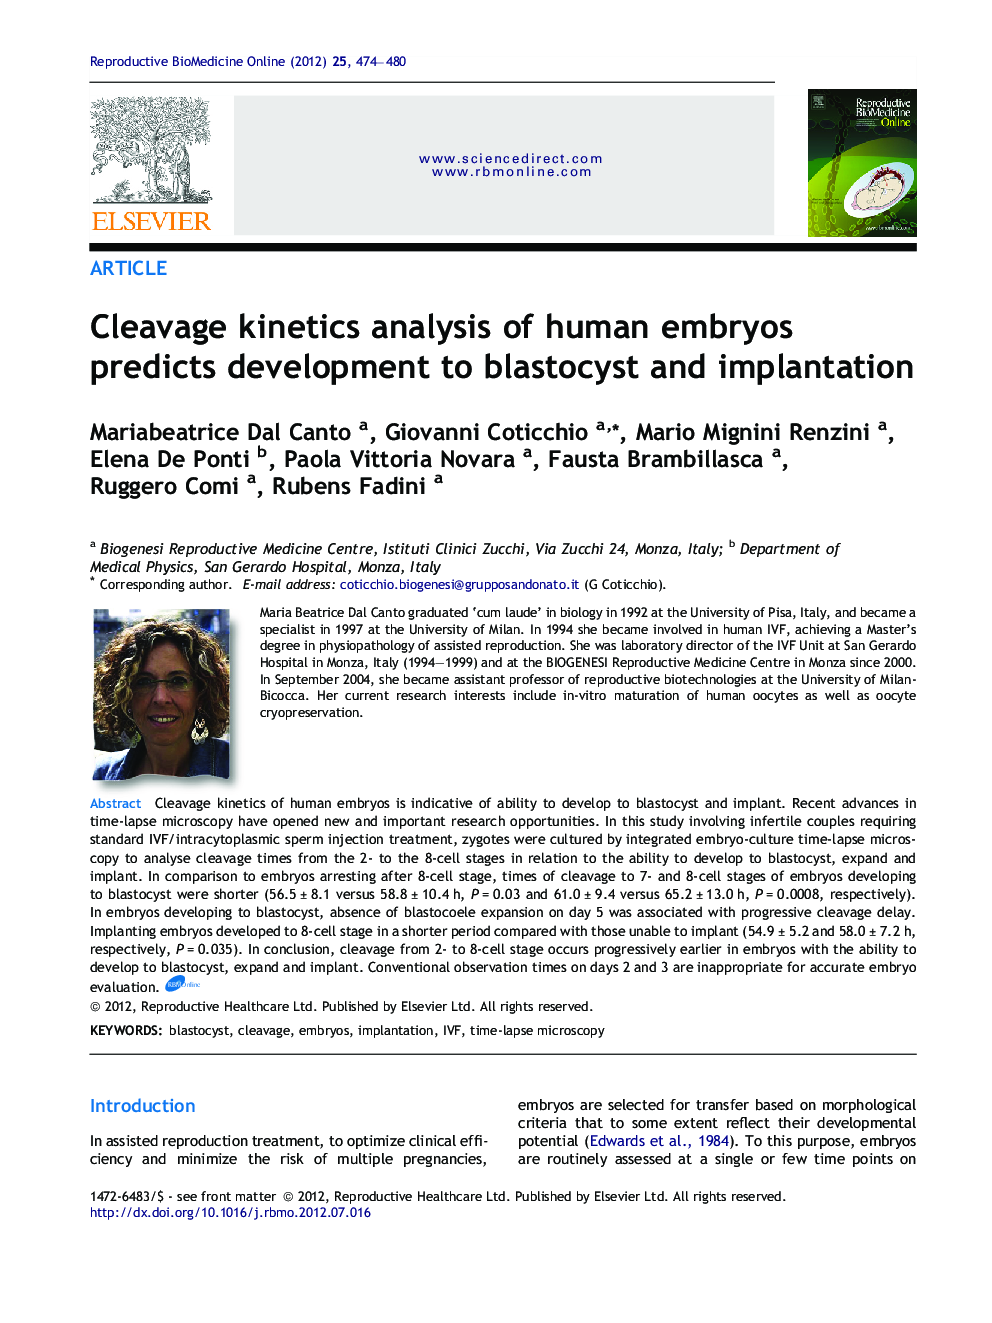 Cleavage kinetics analysis of human embryos predicts development to blastocyst and implantation 